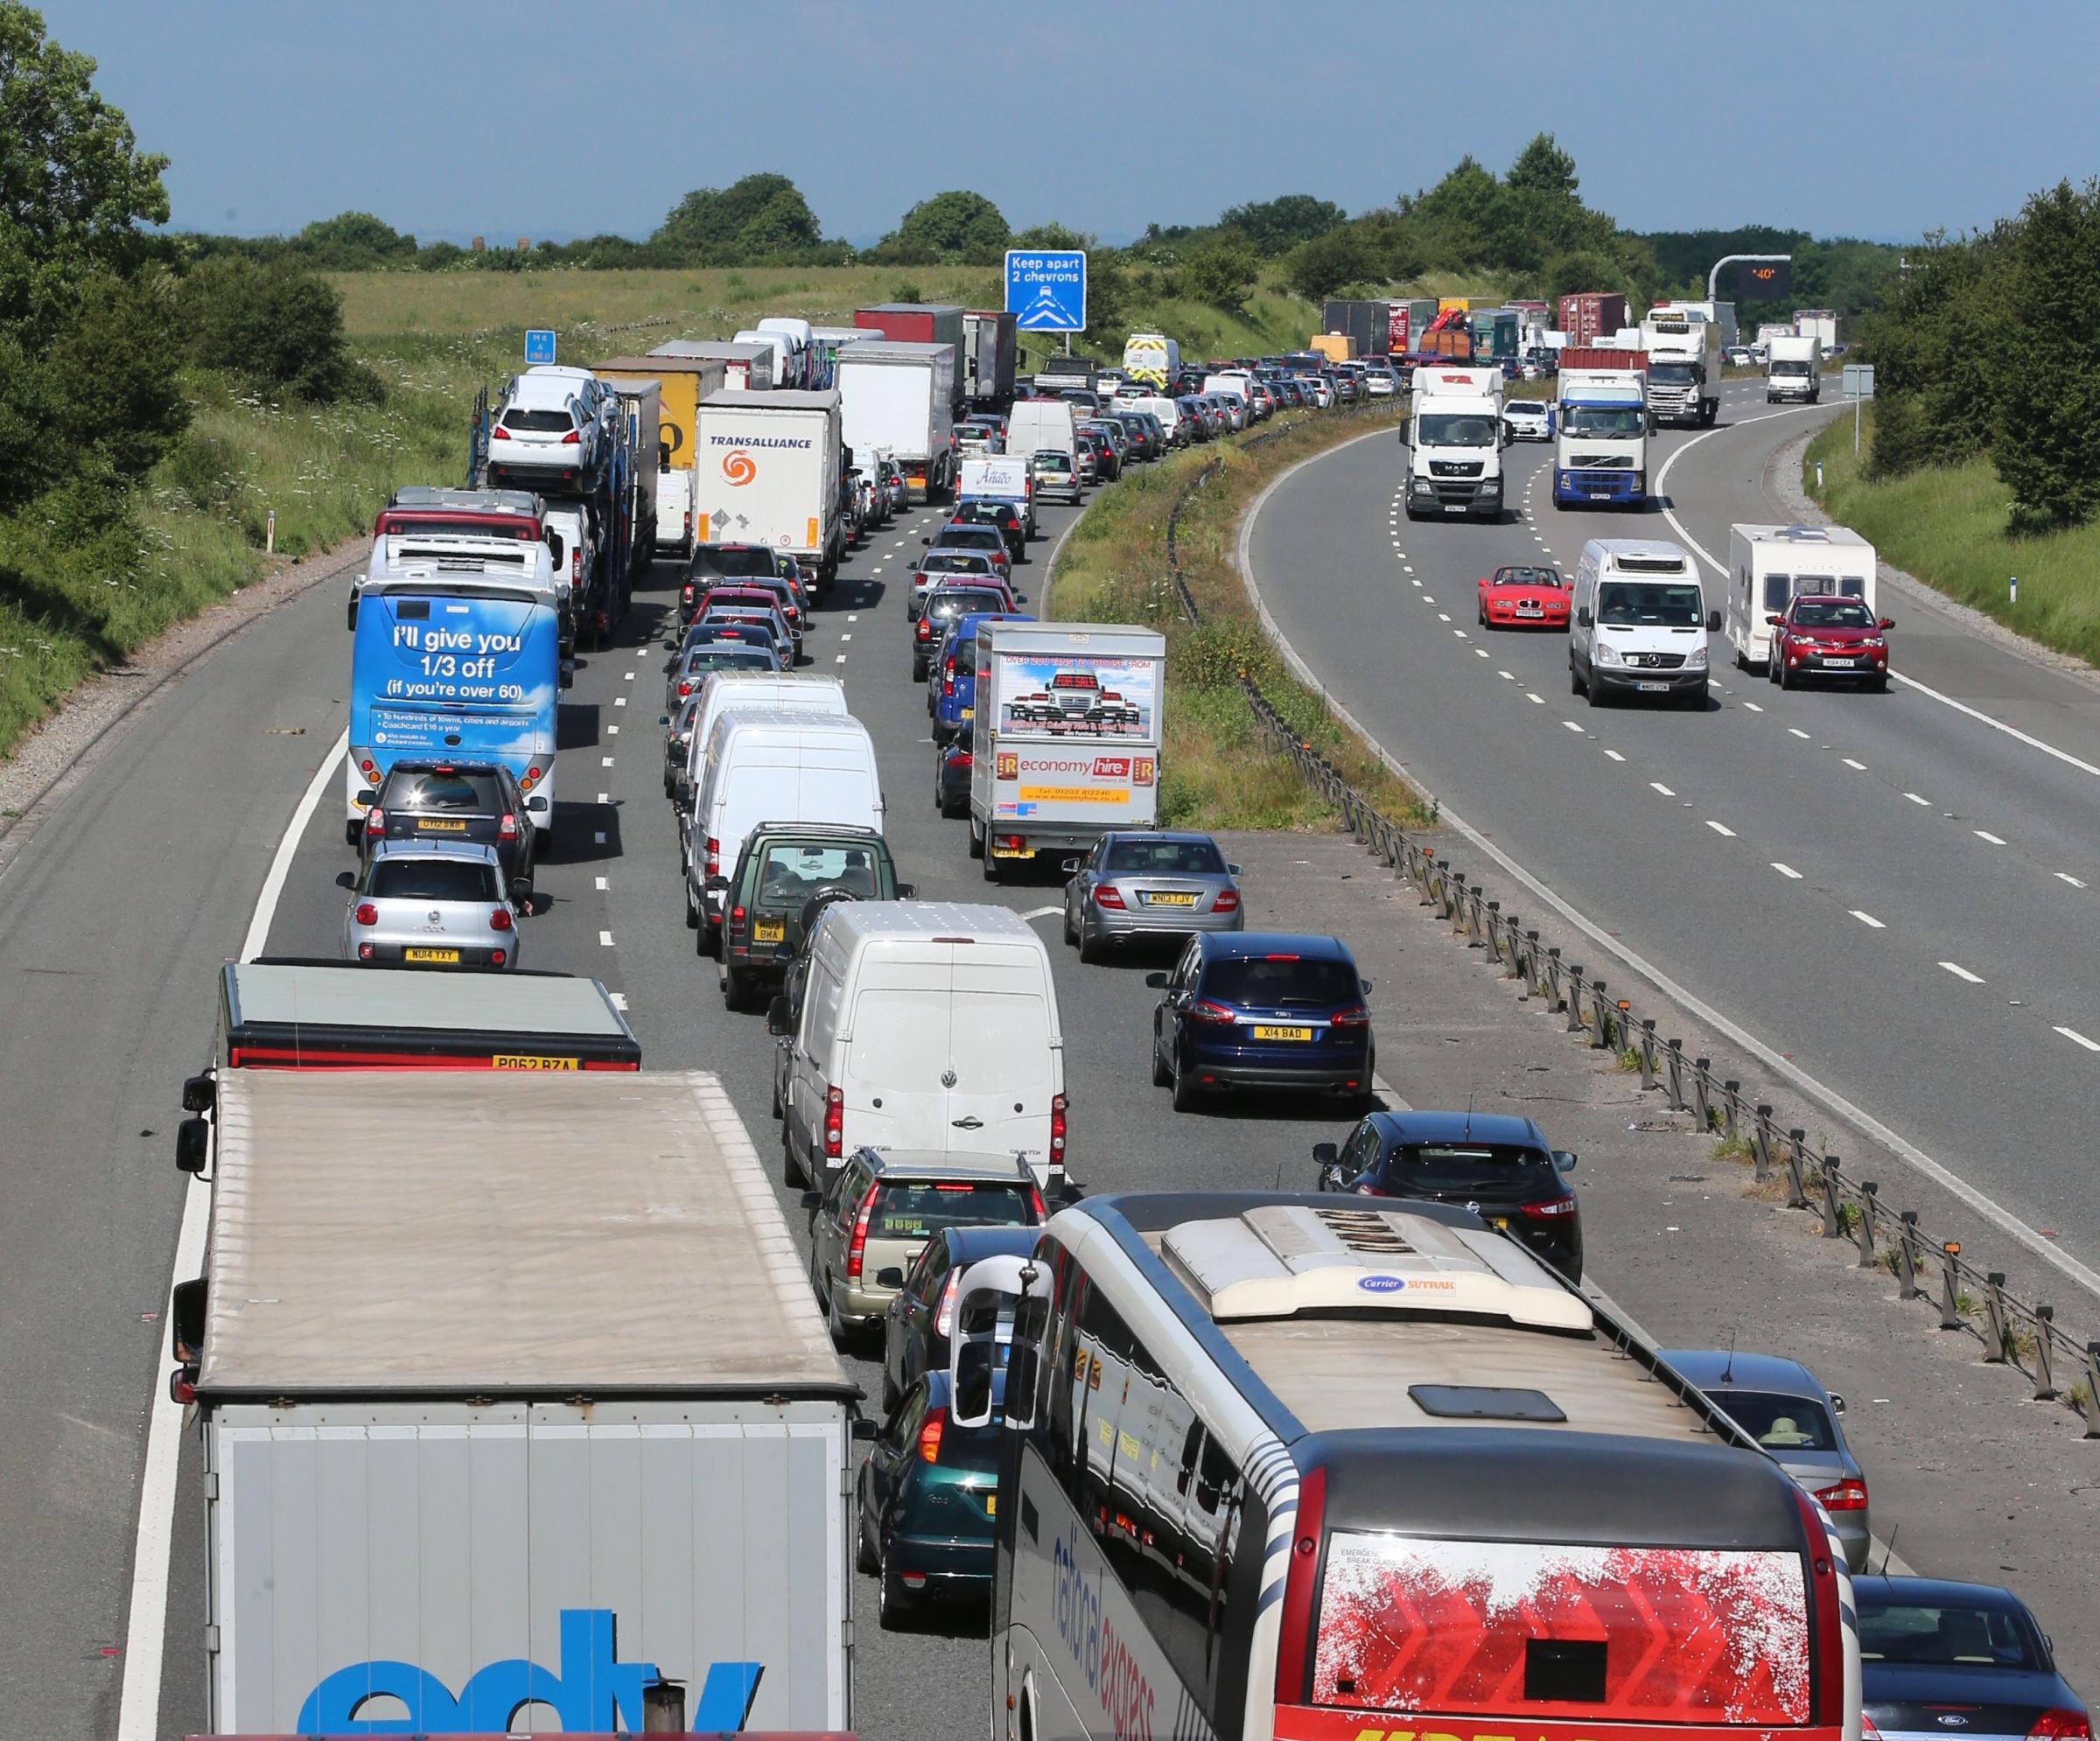 Easter bank holiday getaway - when to travel and which motorways to avoid